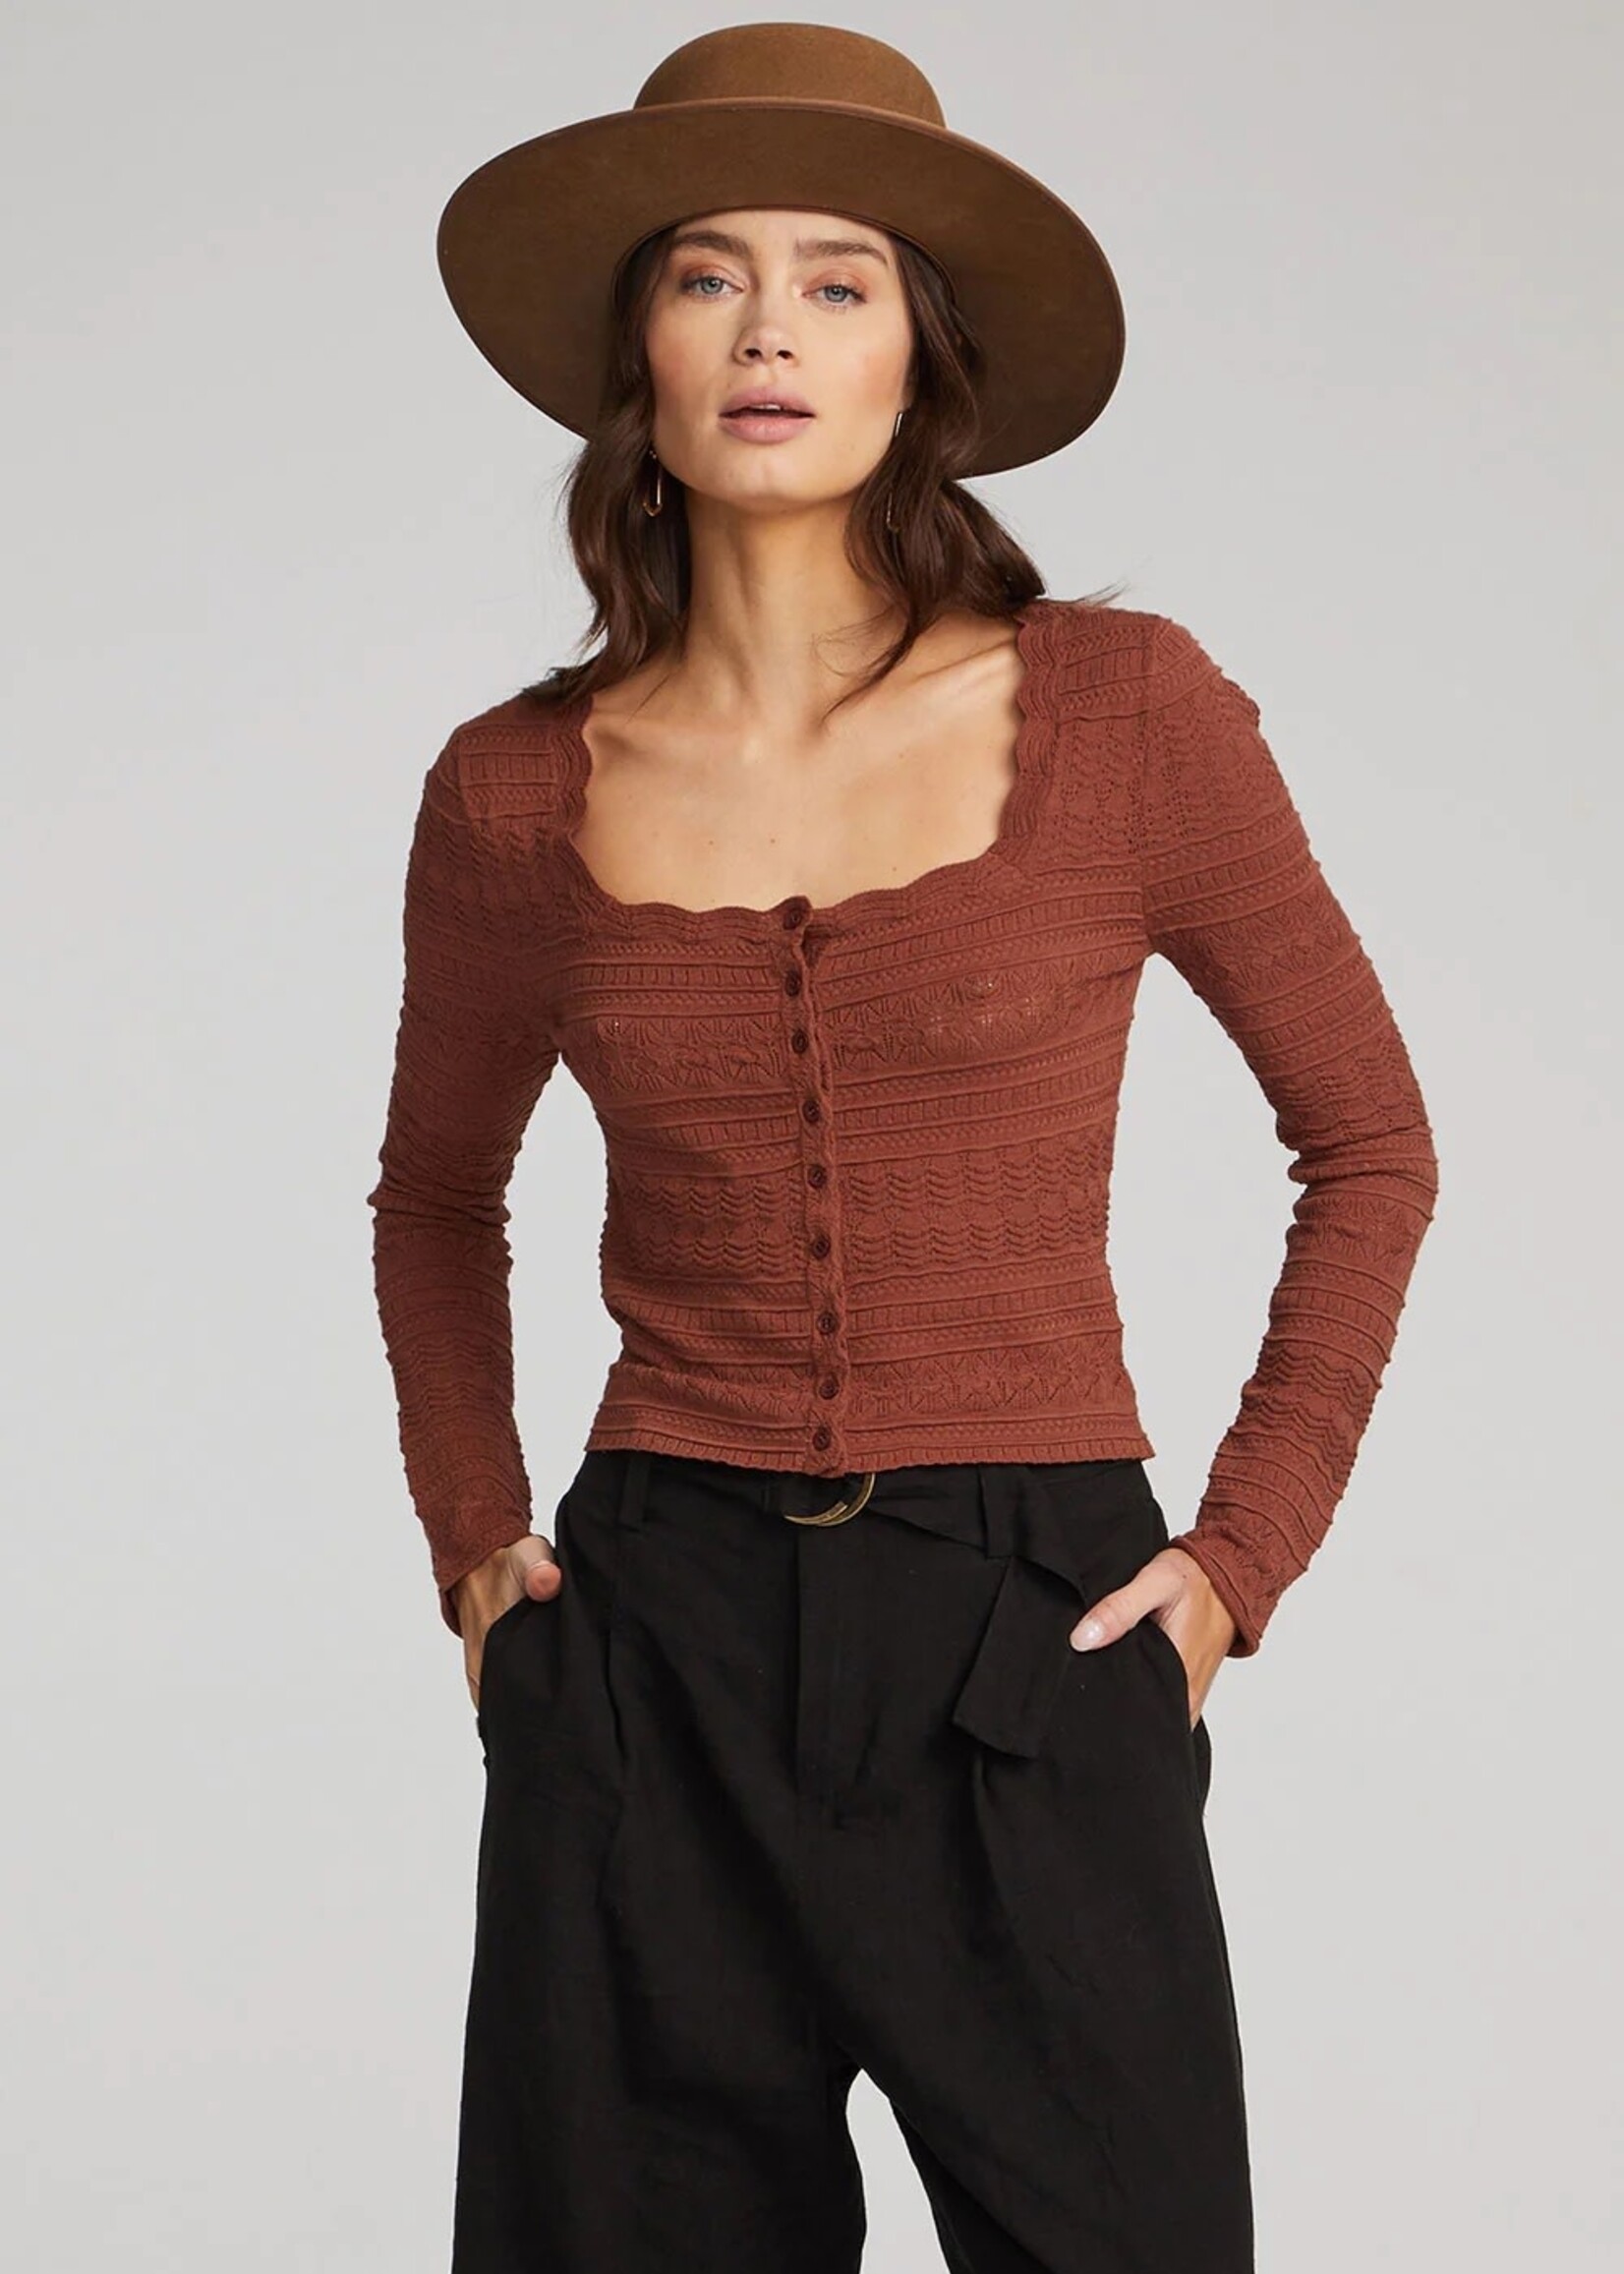 Wildred Sweater - Evelyn Lane Clothing Co.